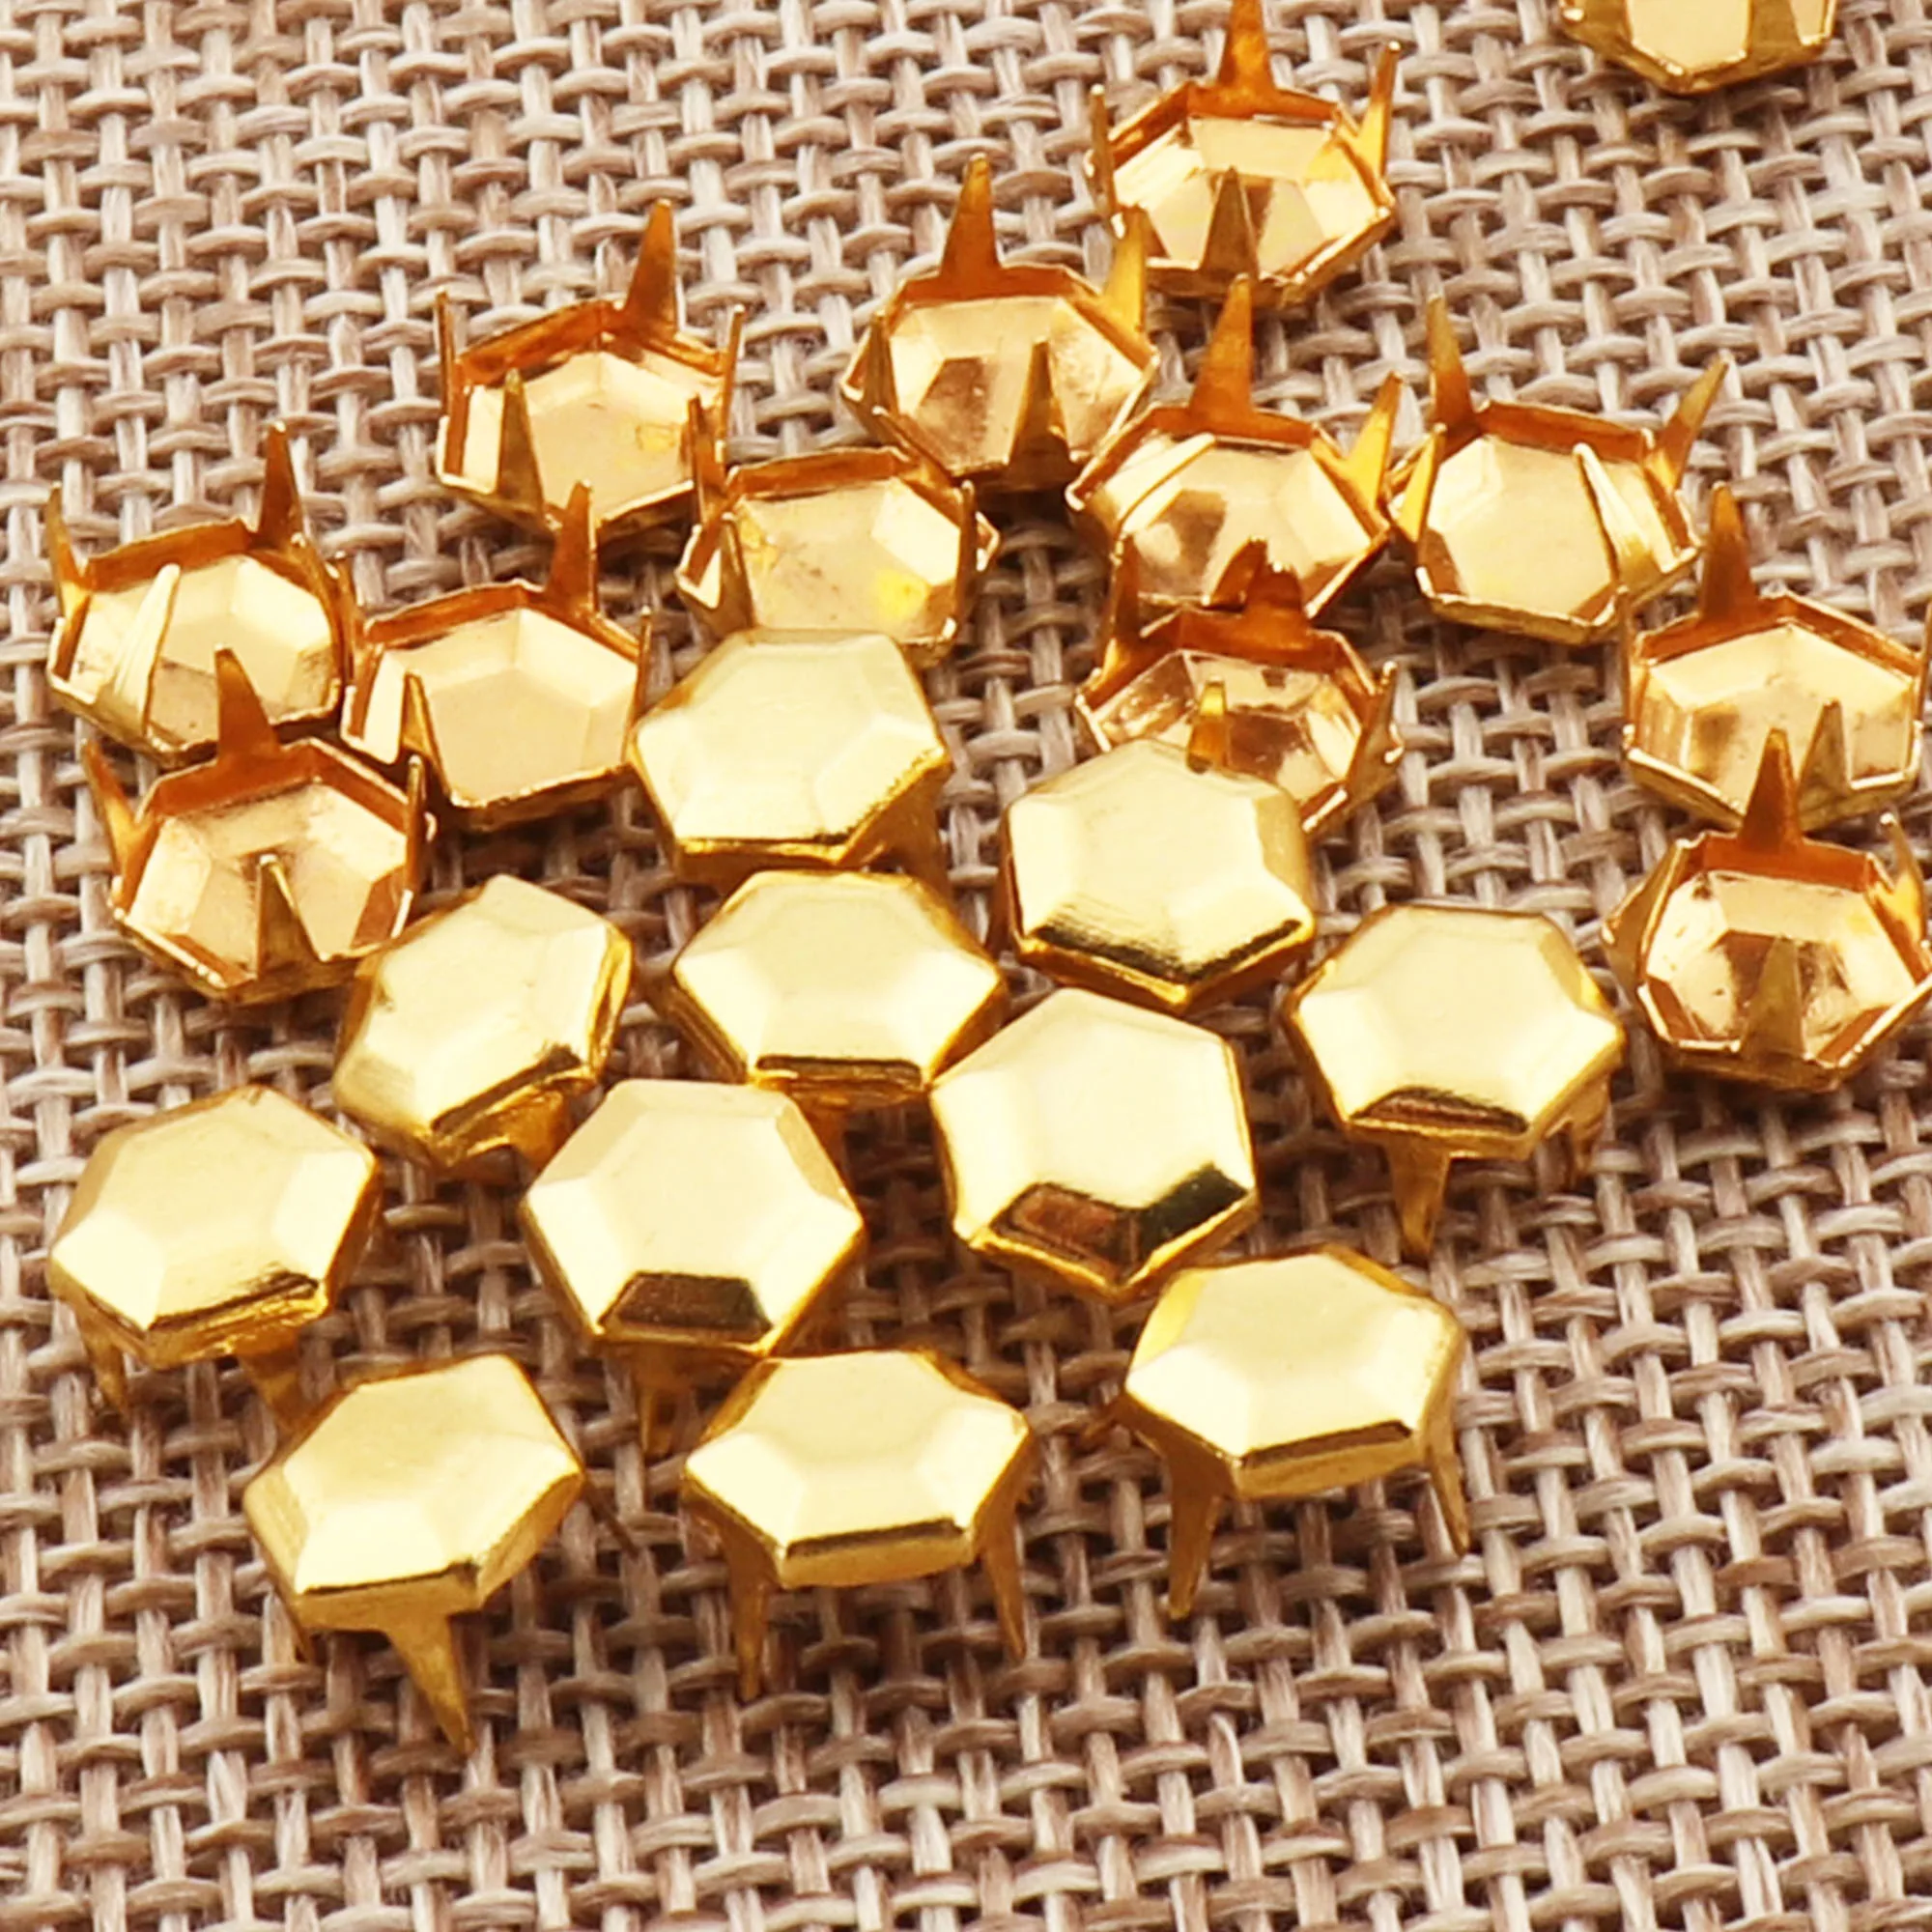 

100 PCS Gold Round Rivet Nailhead Studs Fastener Brads Snaps Prong Leather Craft Rivets Belt Bedazzler Jewelry nailheads 7mm